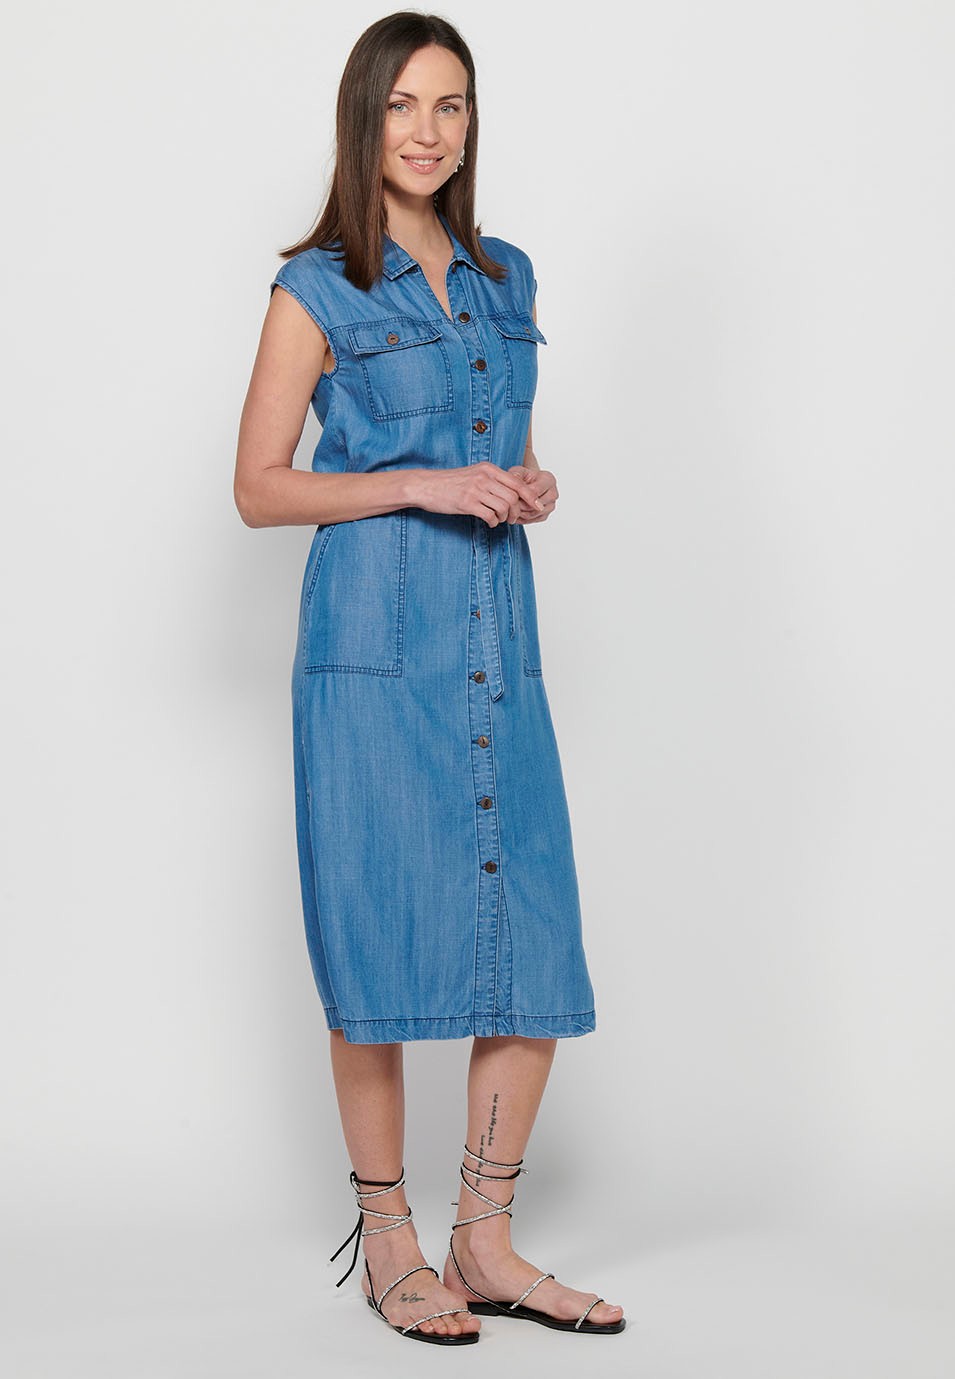 Women's Sleeveless Shirt Style Long Dress with Adjustable Waist with Drawstring and Button Front Closure in Blue 7